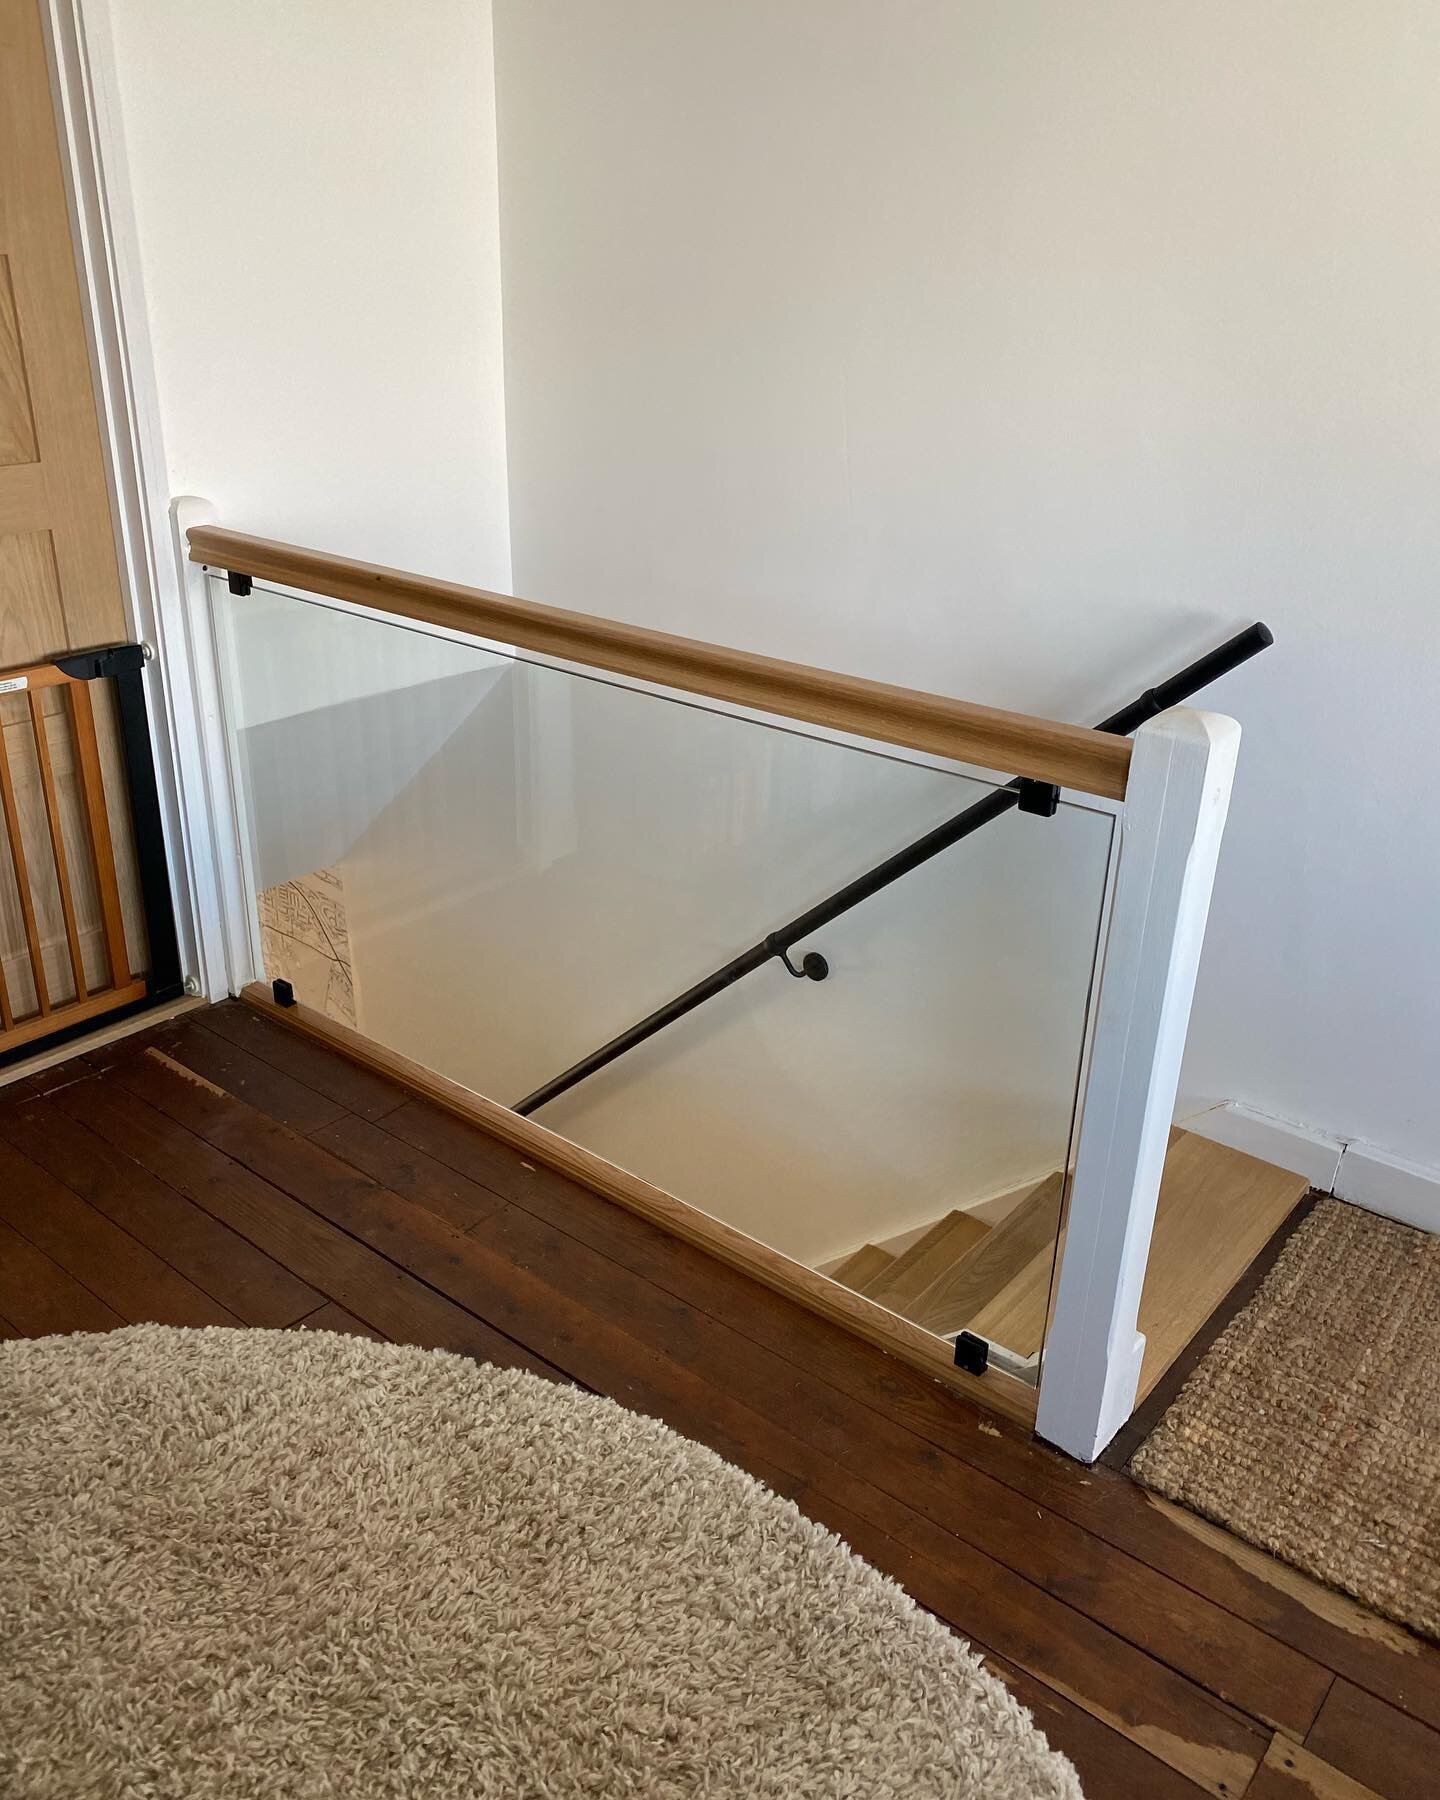 New oak treads and risers fitted over existing stairs. Oak handrail and glass supplied and fitted.